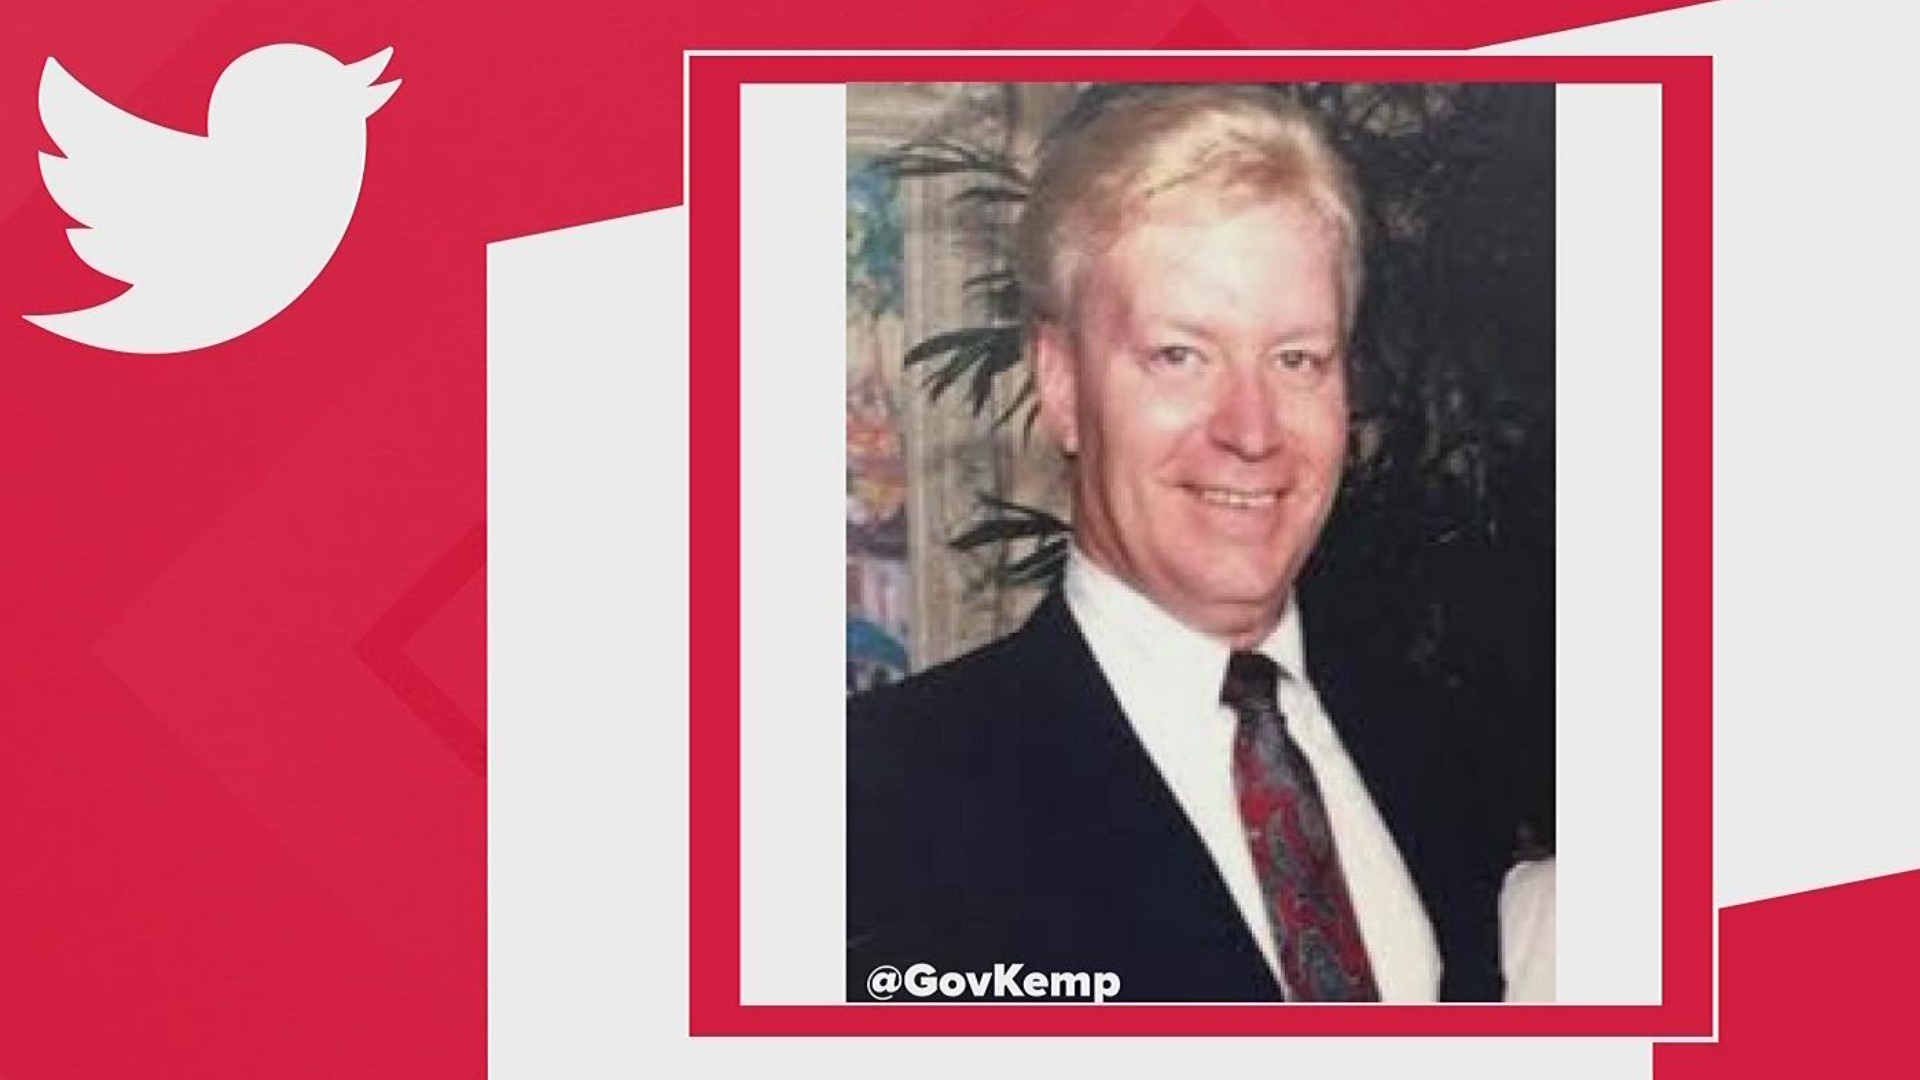 Gov. Brian Kemp released a statement on the lawmaker's passing.